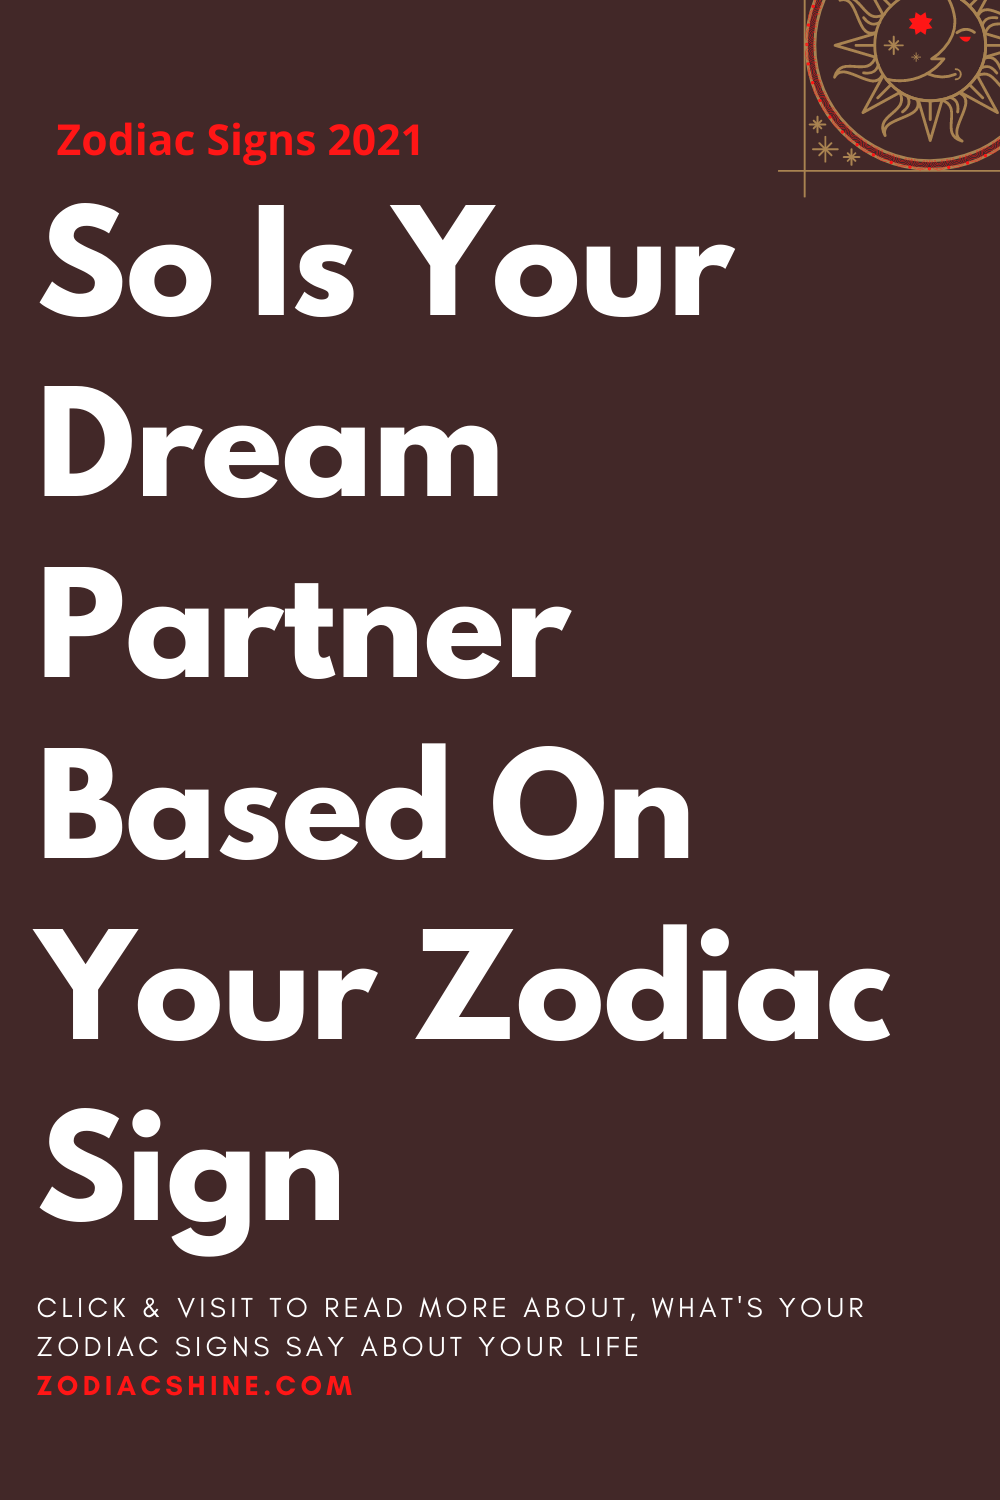 So Is Your Dream Partner Based On Your Zodiac Sign